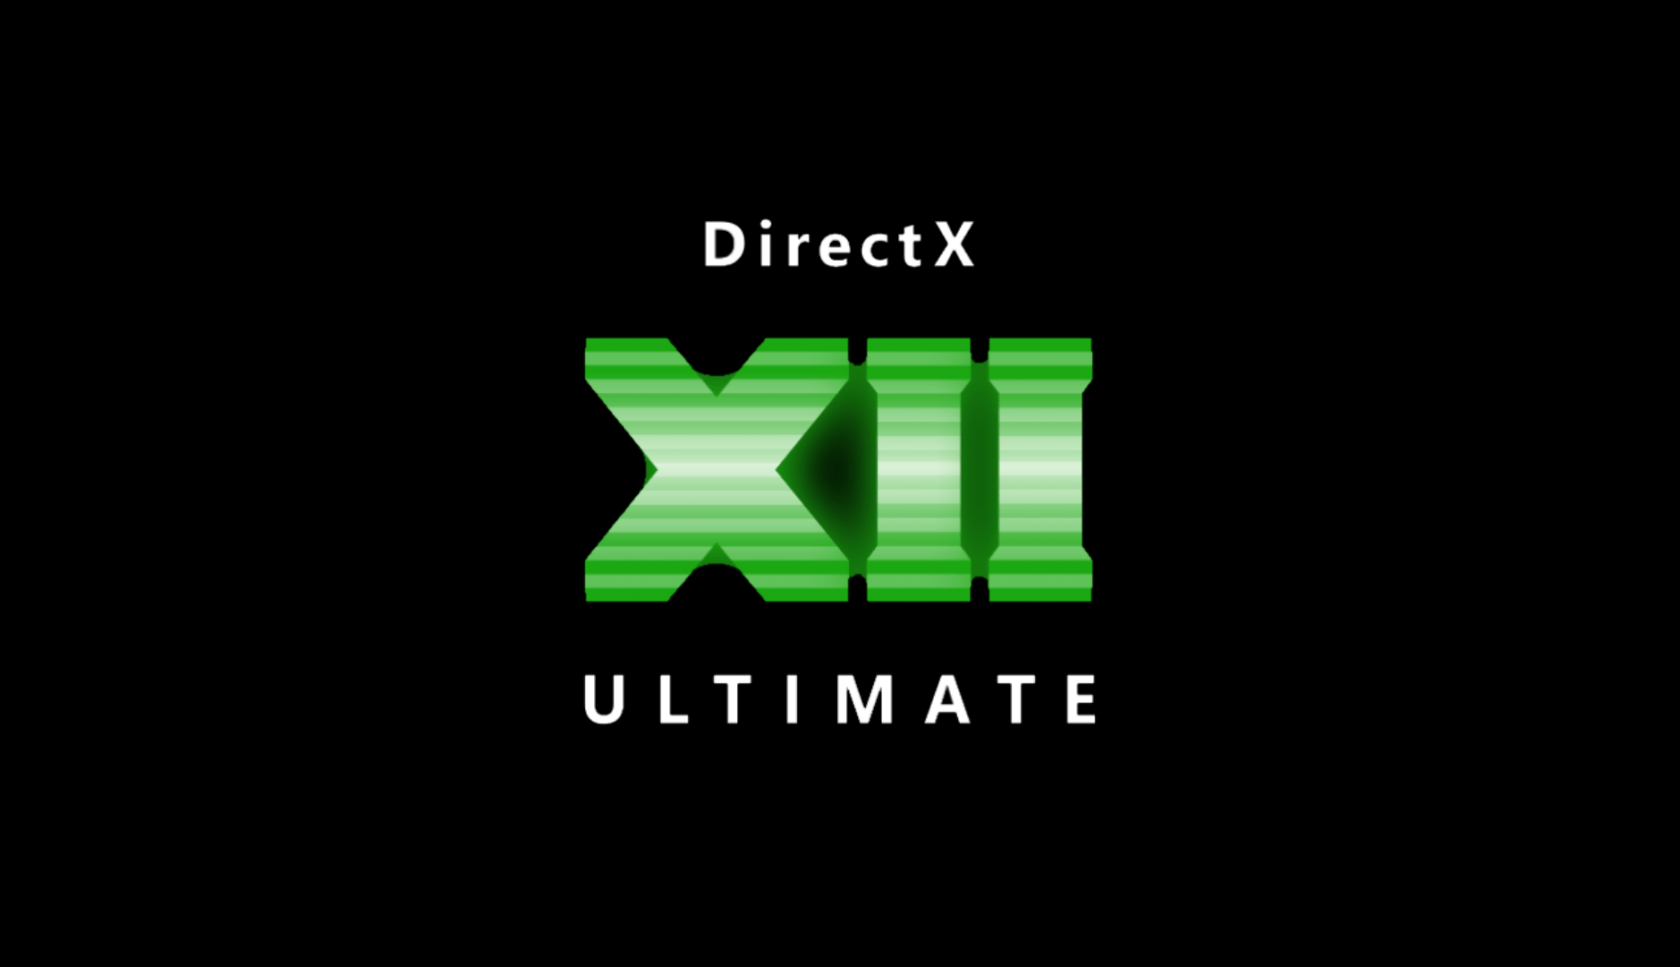 Microsoft's DirectX 12 Ultimate graphics API seeks to unify Xbox and PC gaming visuals